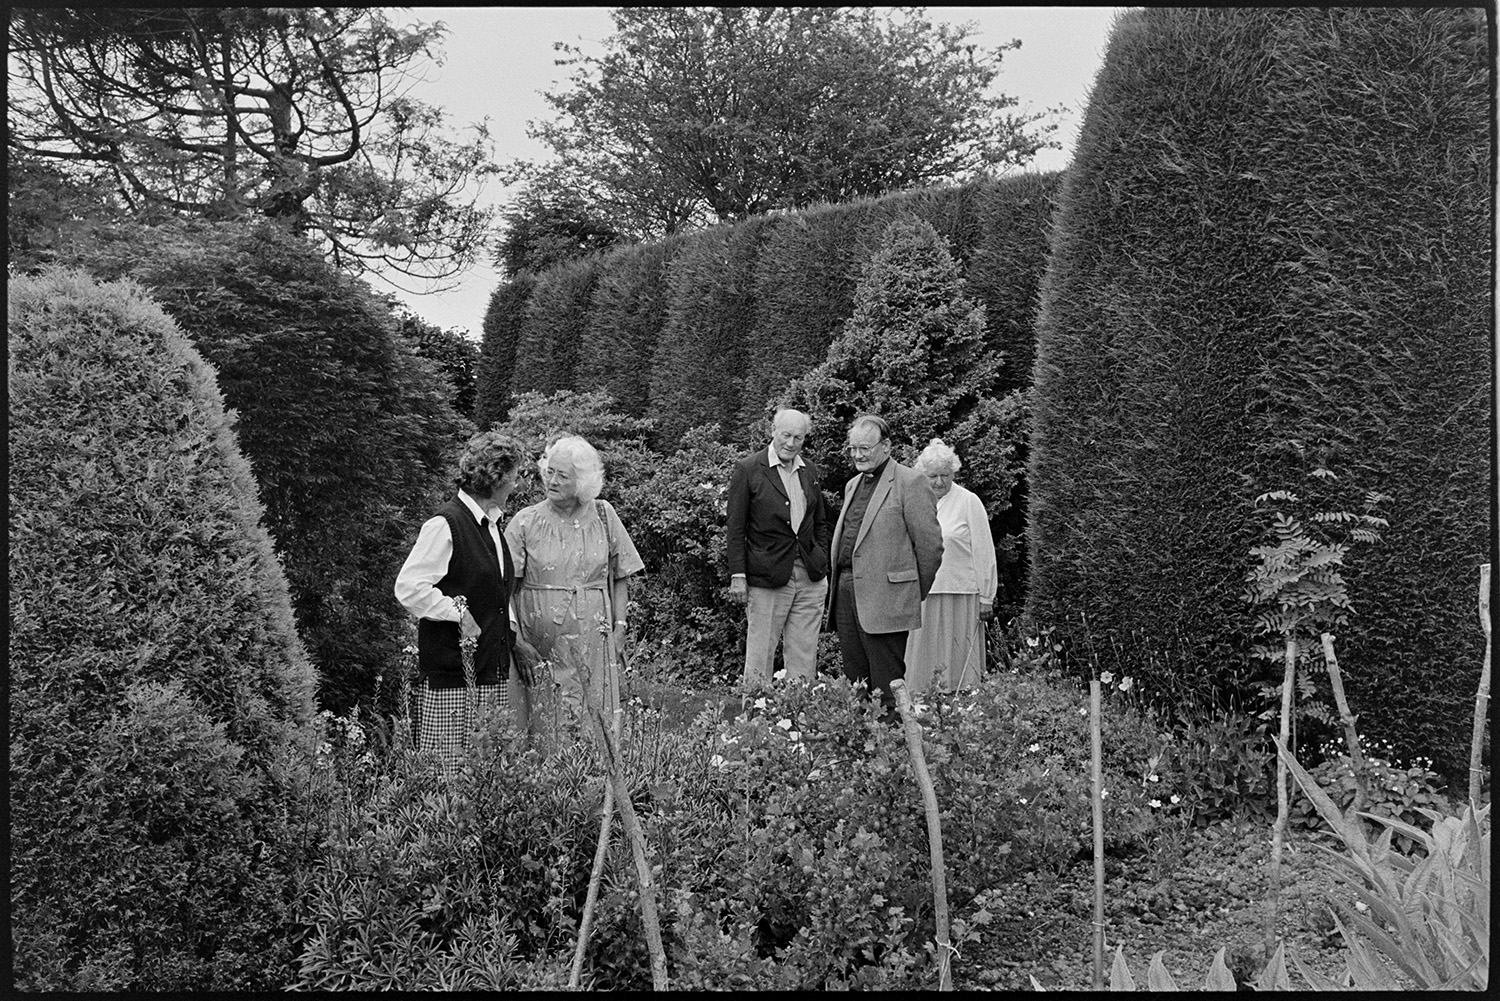 Open garden, with cake stall and people looking around garden. Thatched garage.
[Three women and two men, including a vicar, are admiring the garden at an open garden event at Highdown, Ashreigney, hosted by Moggie Dew. There are many tall evergreen shrubs with trees behind them.]